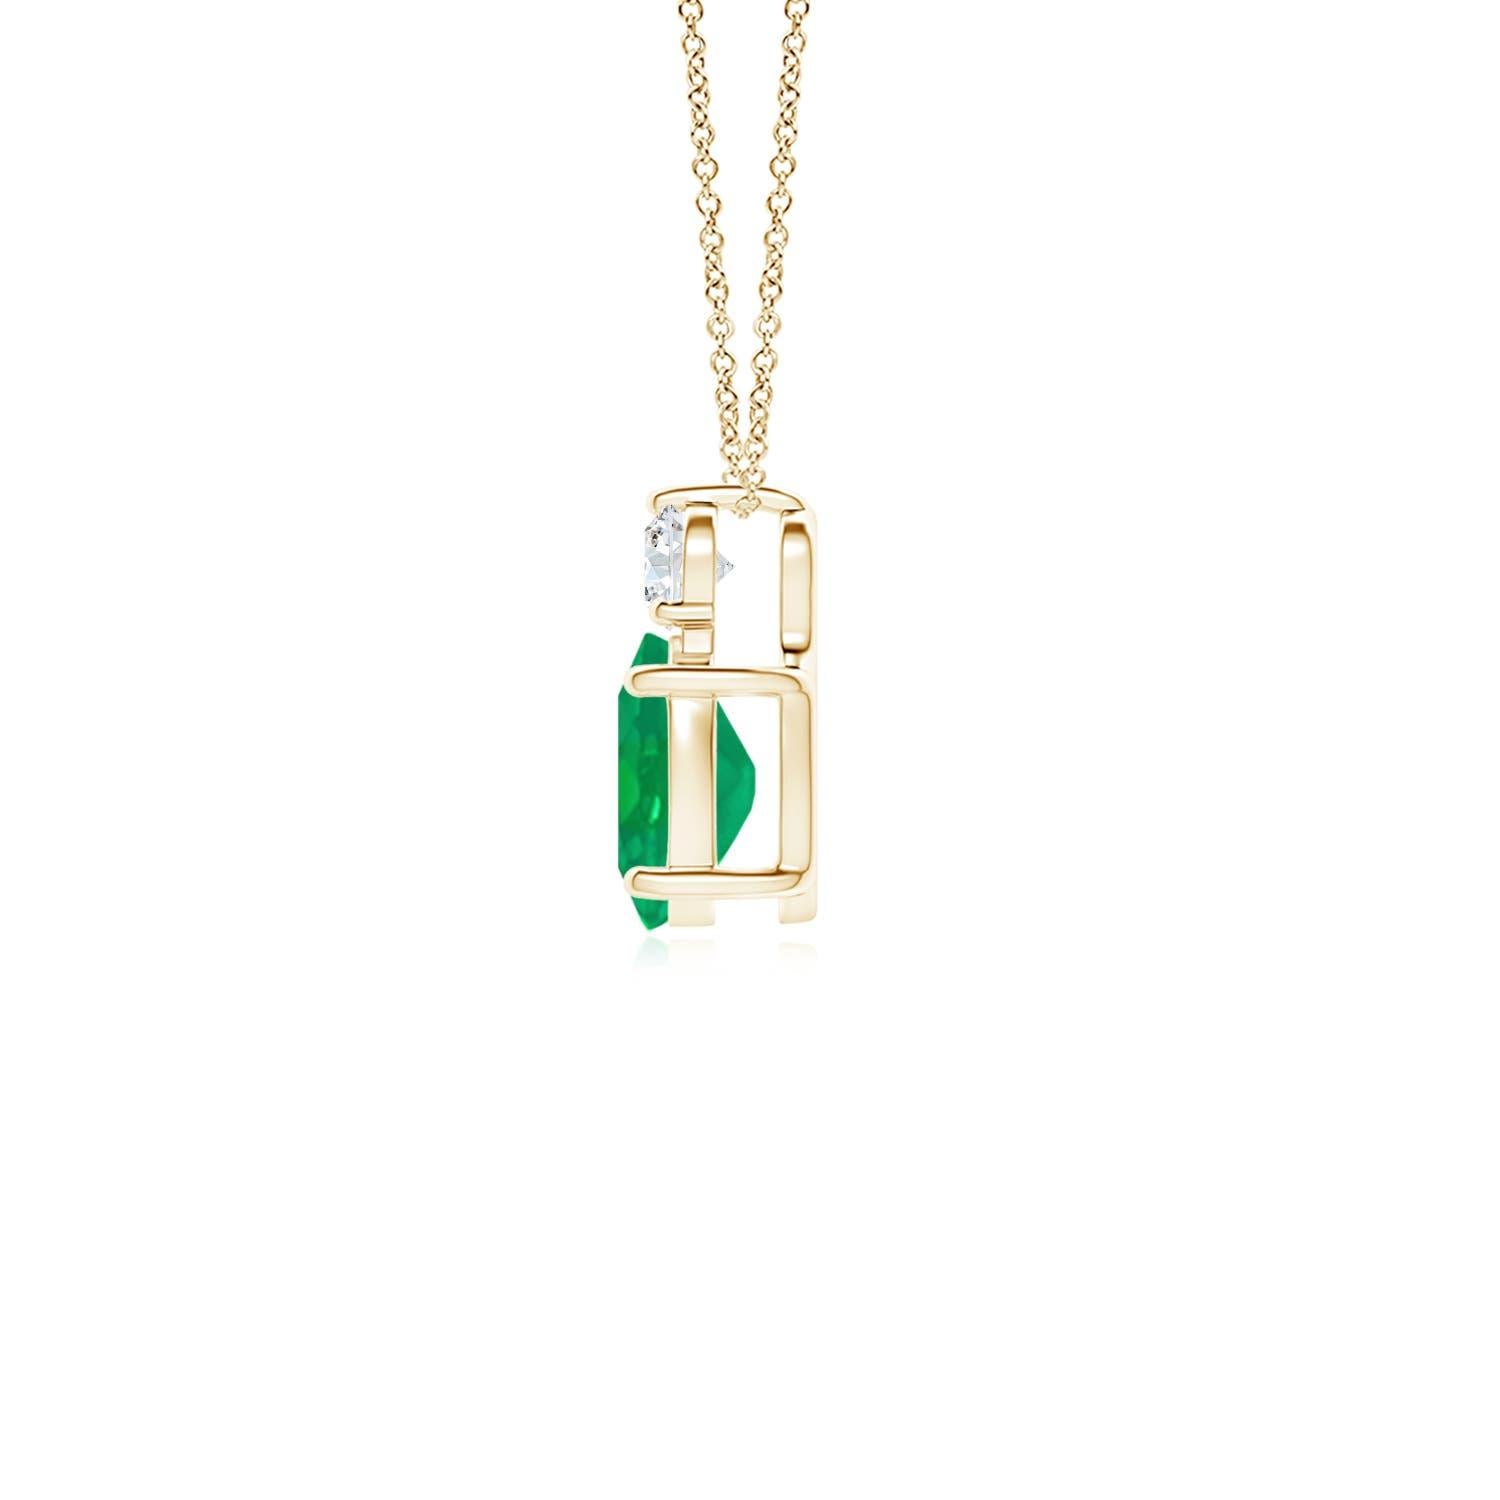 Crafted in 14k yellow gold, this classic solitaire emerald pendant personifies elegance. The rich green oval emerald is topped by a sparkling diamond for added allure. The intricate scroll work on the sides enhances this prong set emerald pendant's